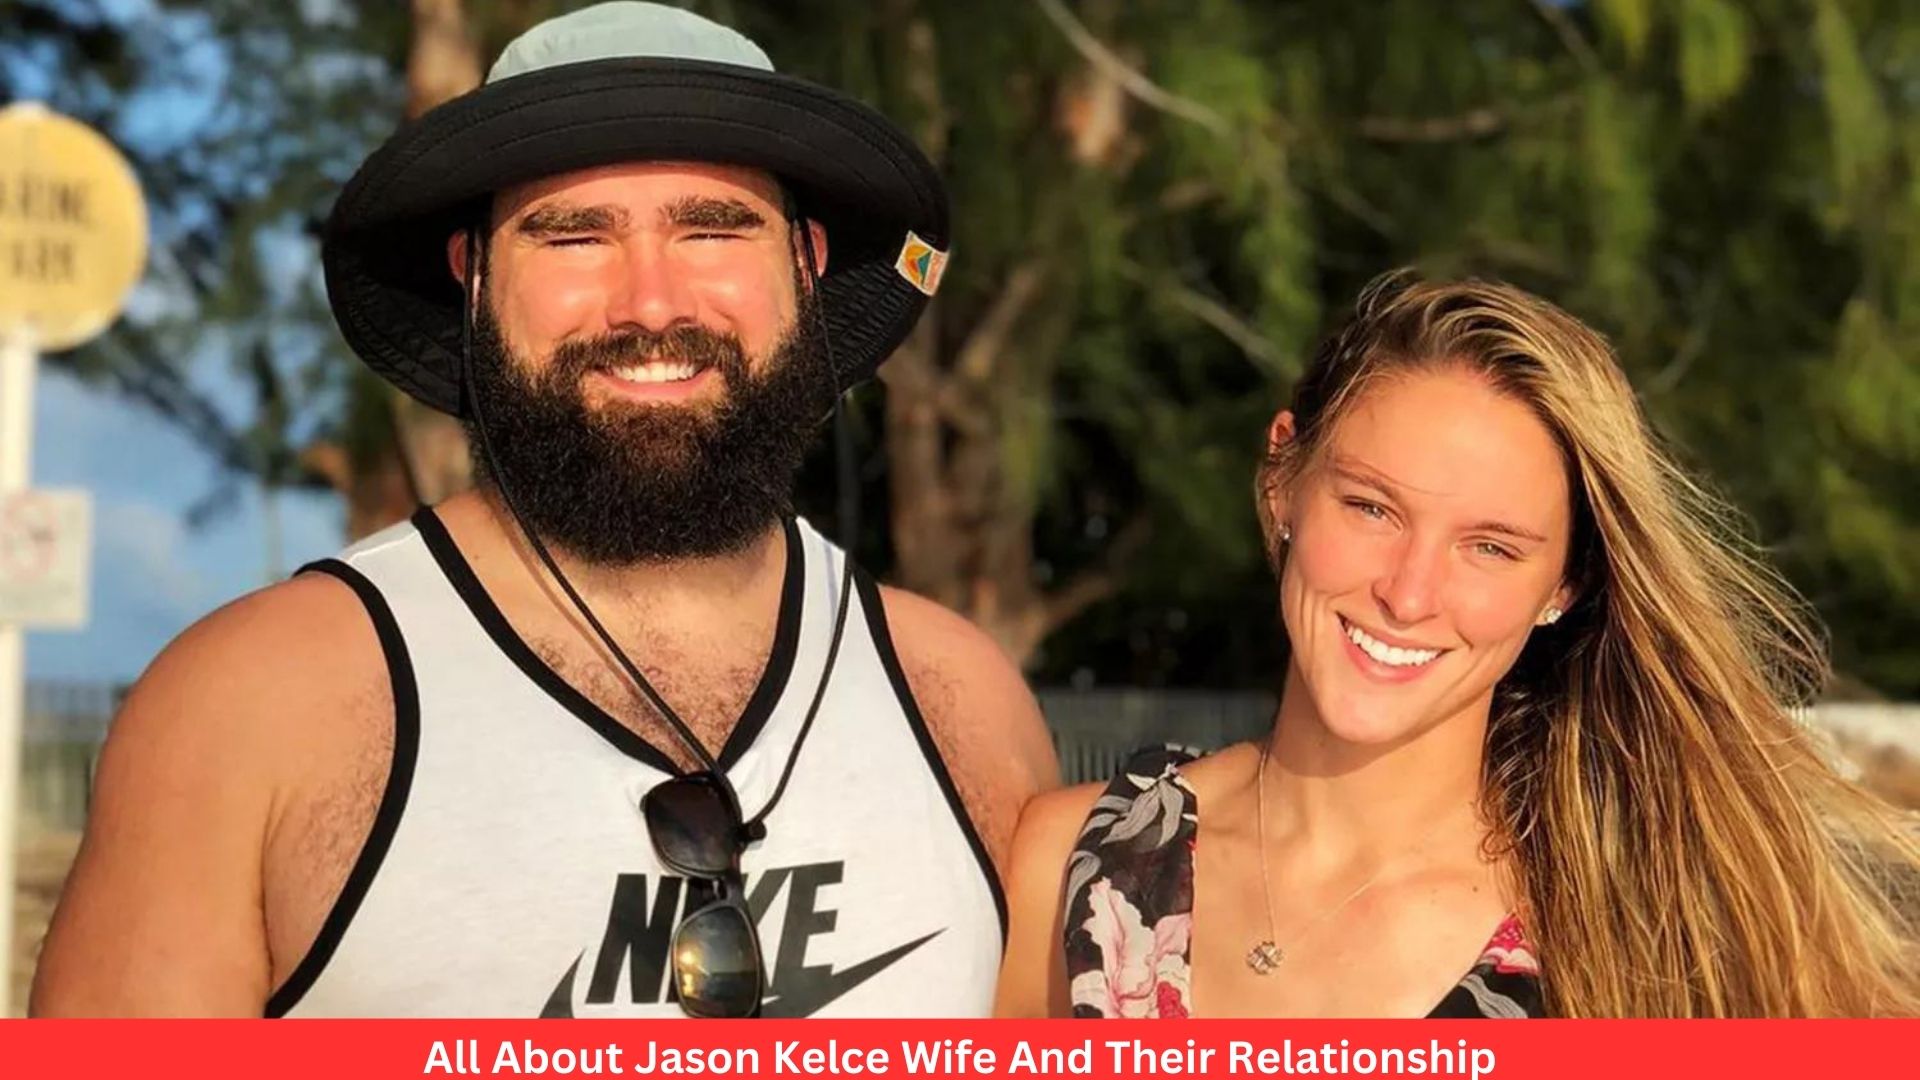 All About Jason Kelce Wife, Kids And Their Relationship